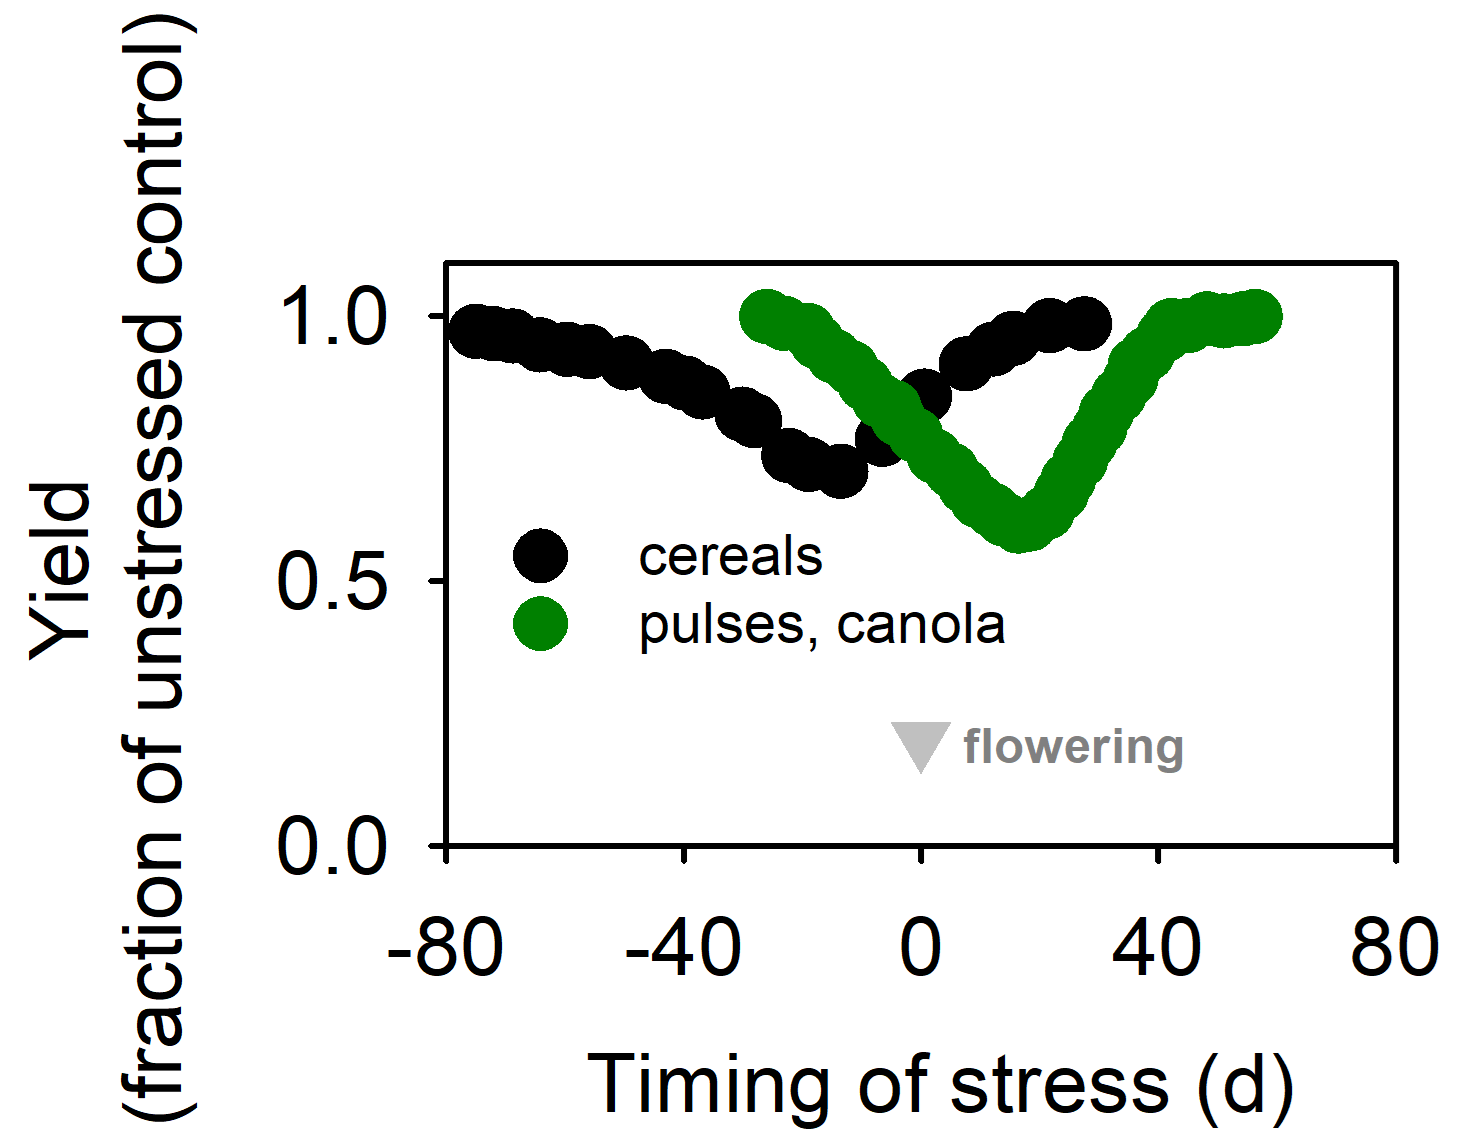 Species-specific critical windows for grain number and yield. Source: Sadras and Dreccer 2015.